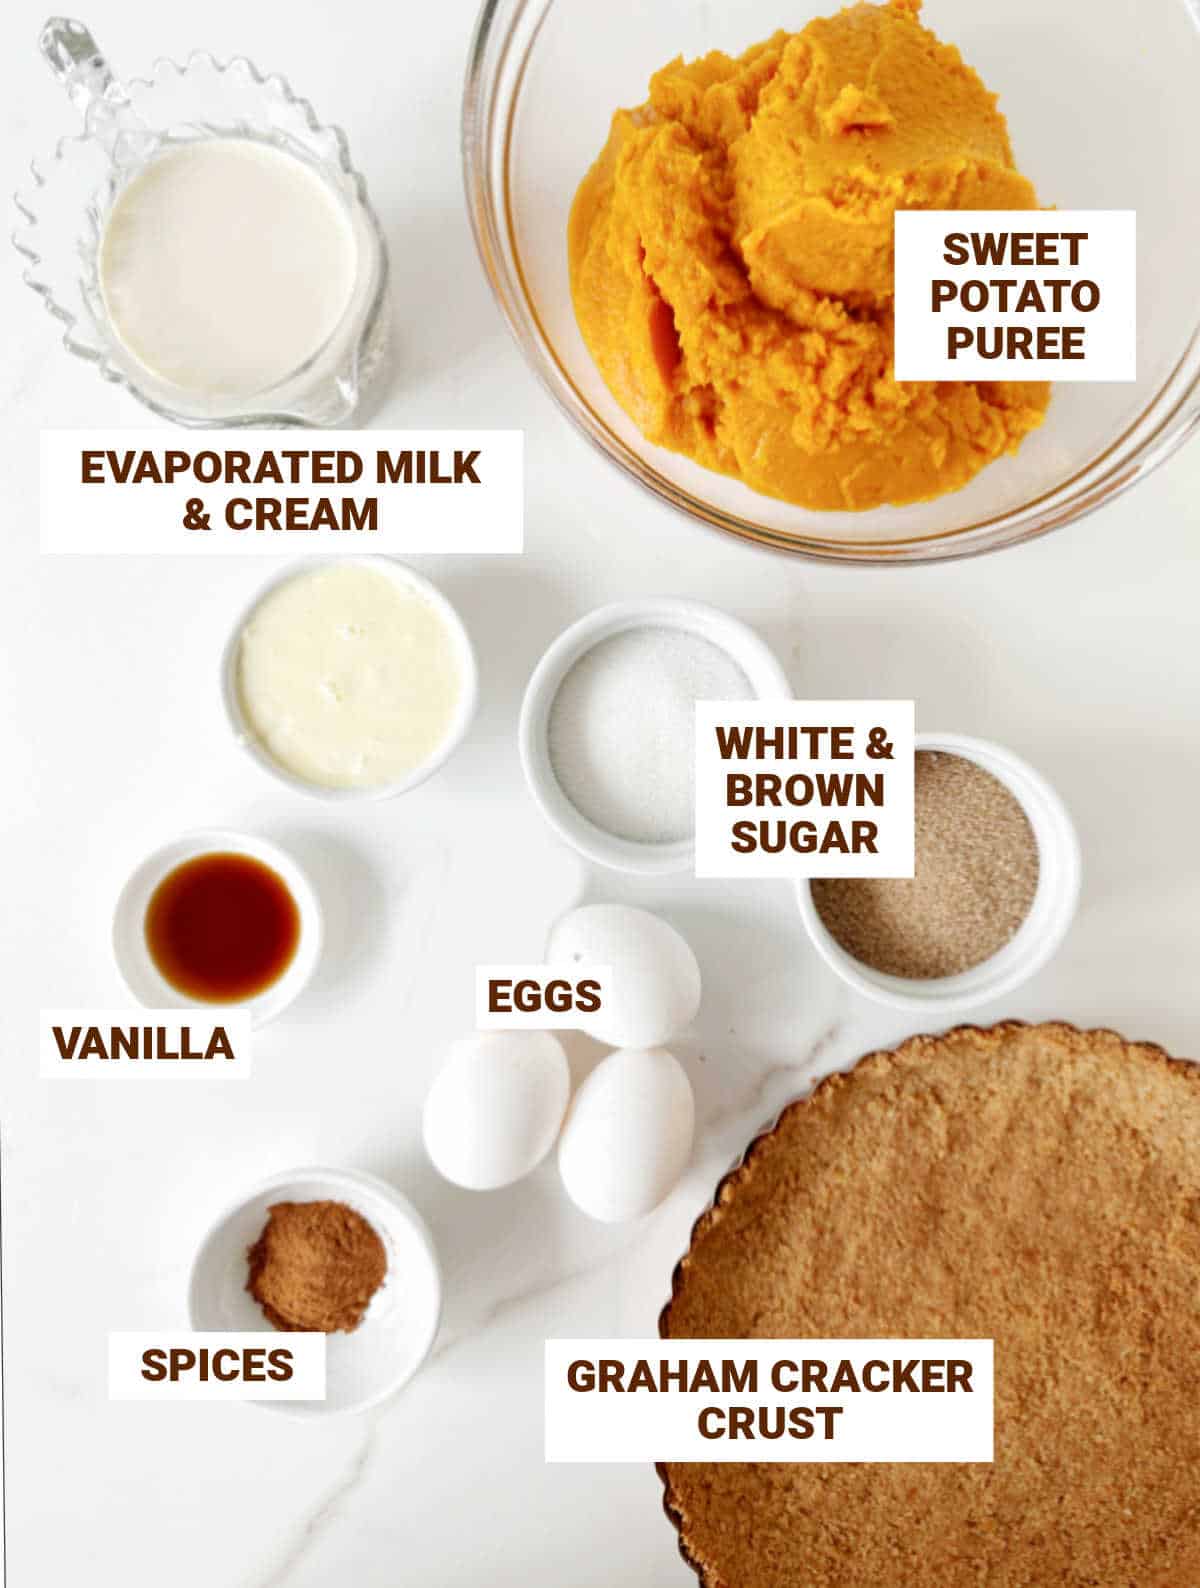 White surface with bowls containing ingredients for sweet potato pie with graham crust including eggs, sugars, cream, evaporated milk, flavorings.